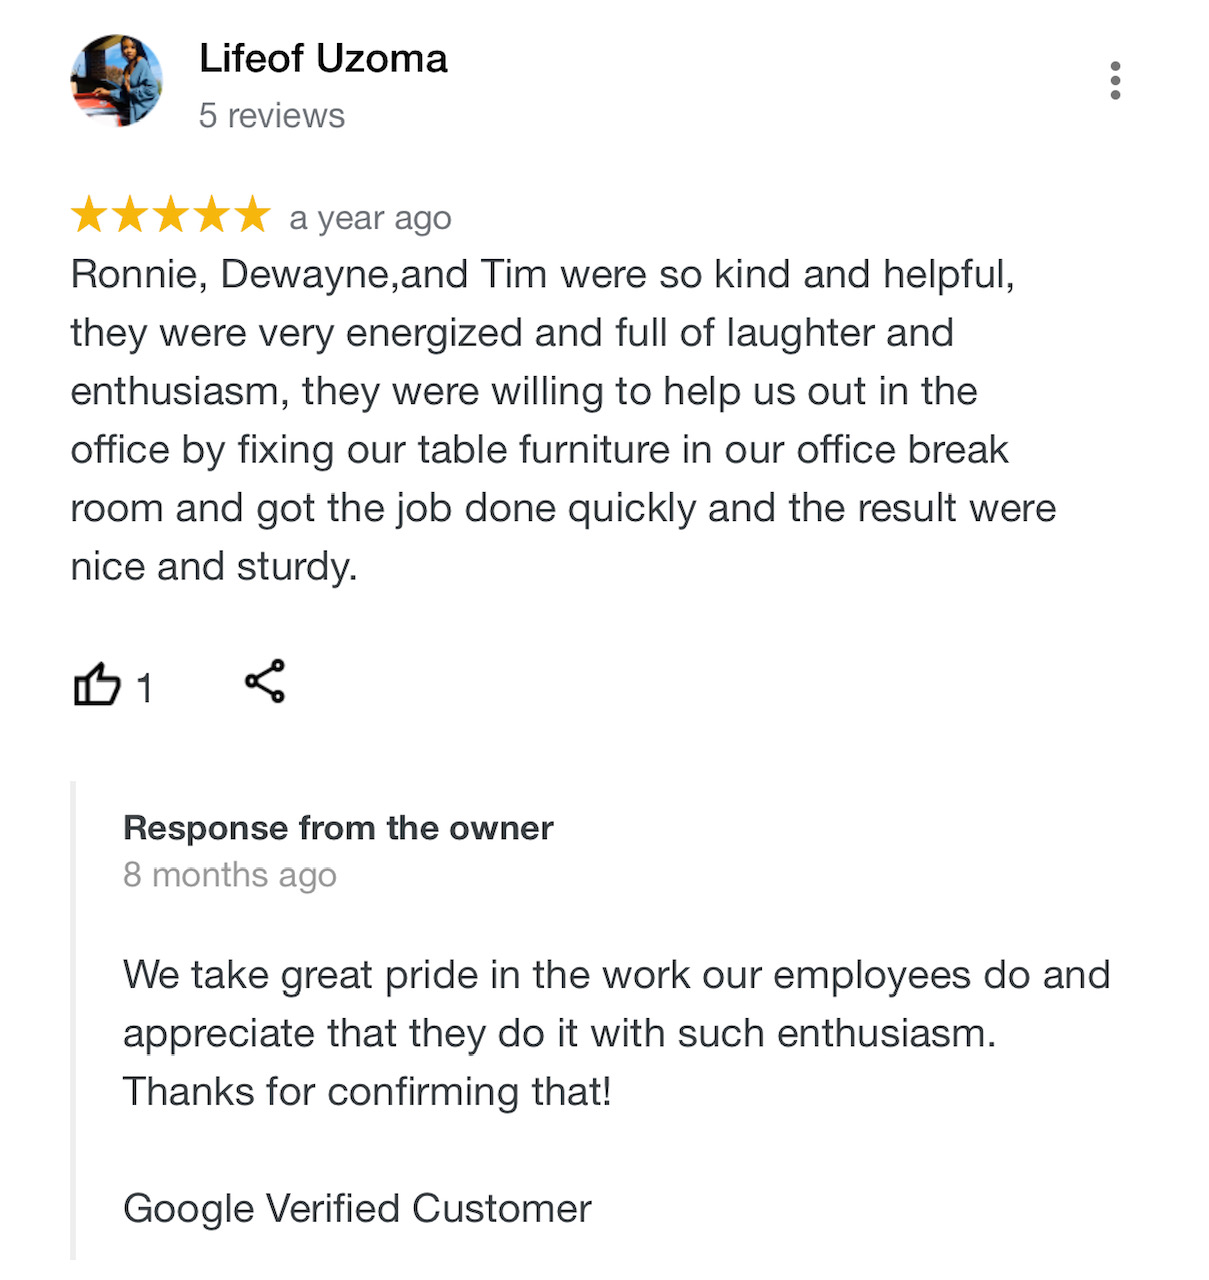 Ronnie, Dewayne, and Tim were so kind and helpful, they were very energized and full of laughter and enthusiasm, they were willing to help us out in the office by fixing out table furniture in our office break room and got the job done quickly and the result were nice and sturdy